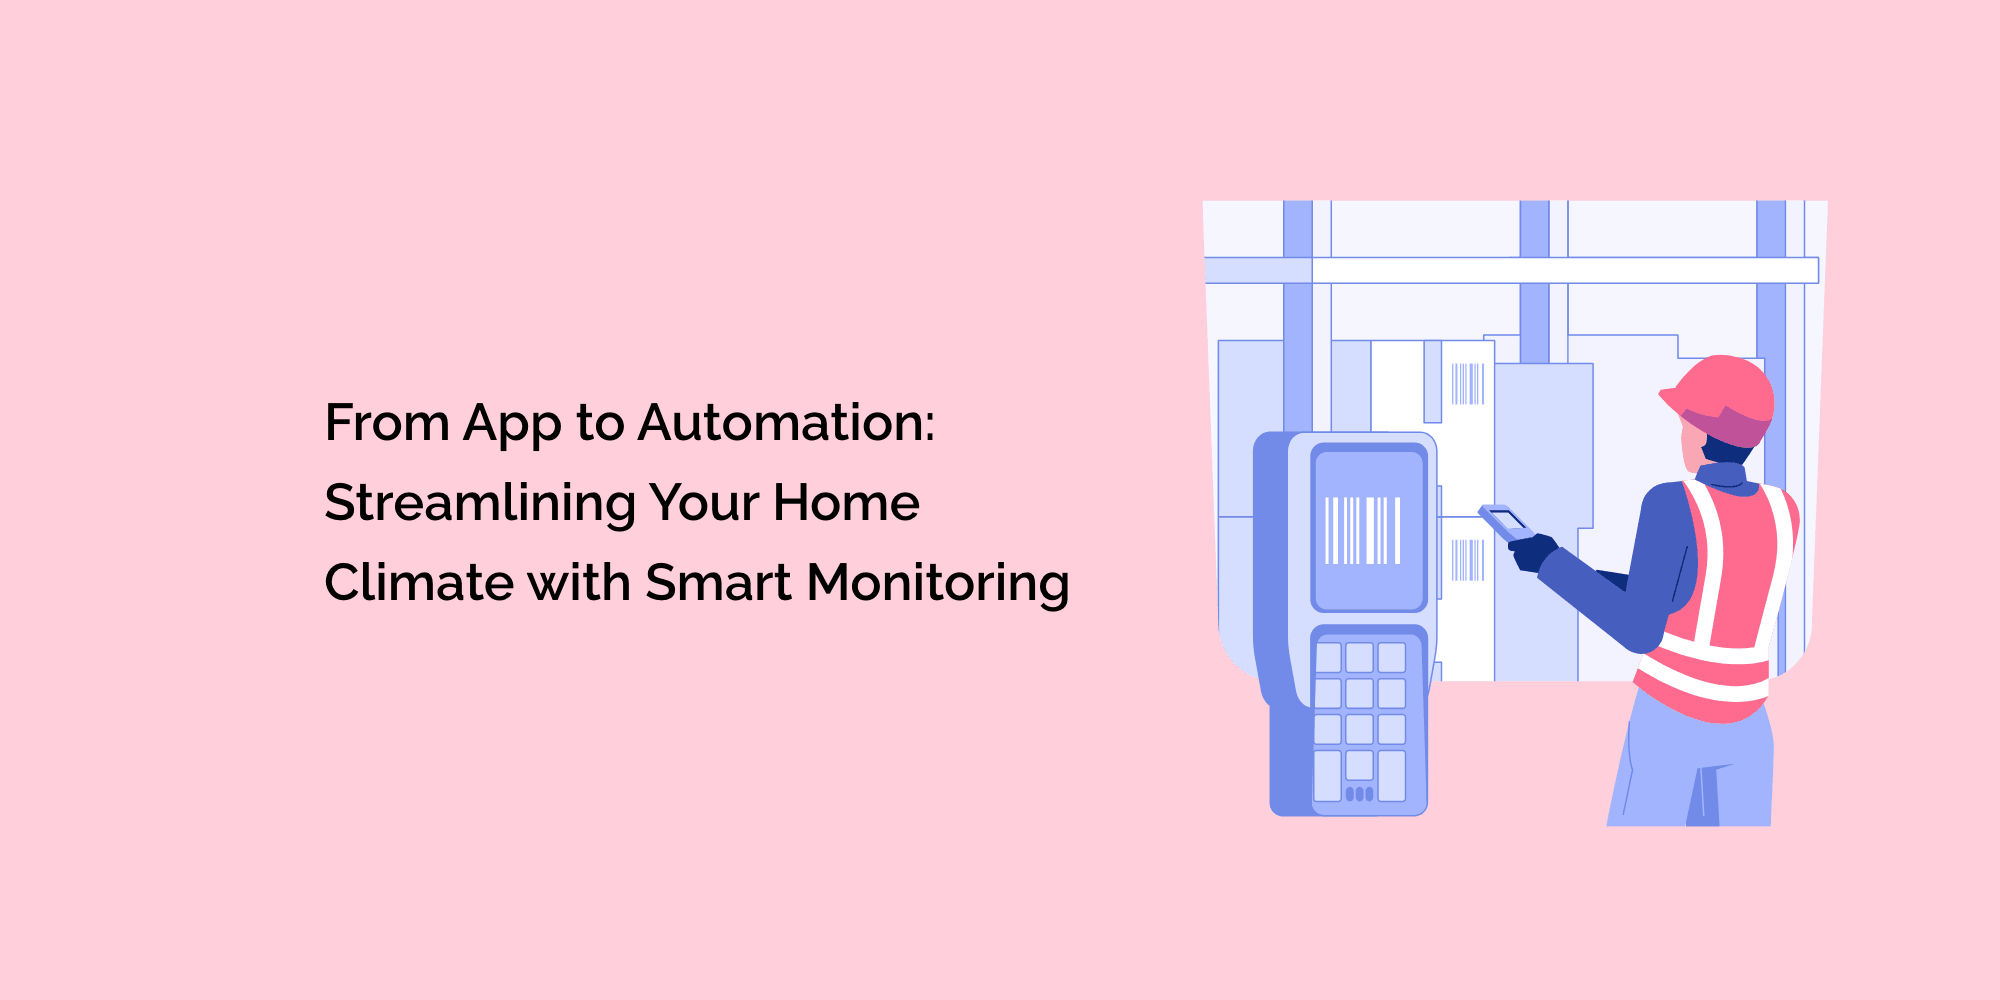 From App to Automation: Streamlining Your Home Climate with Smart Monitoring